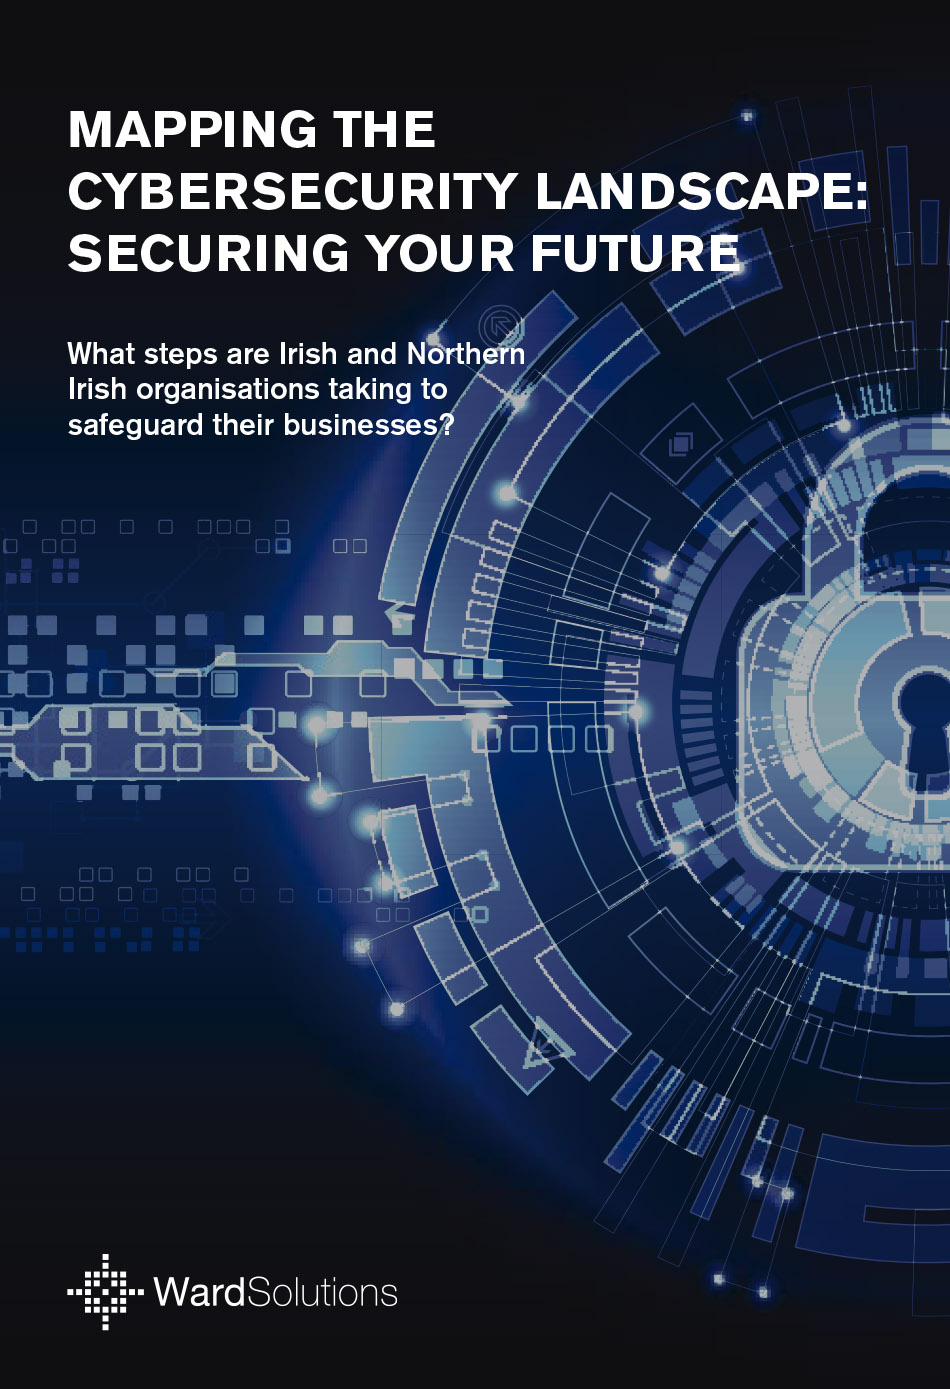 Mapping the Cybersecurity Landscape: Securing Your Future